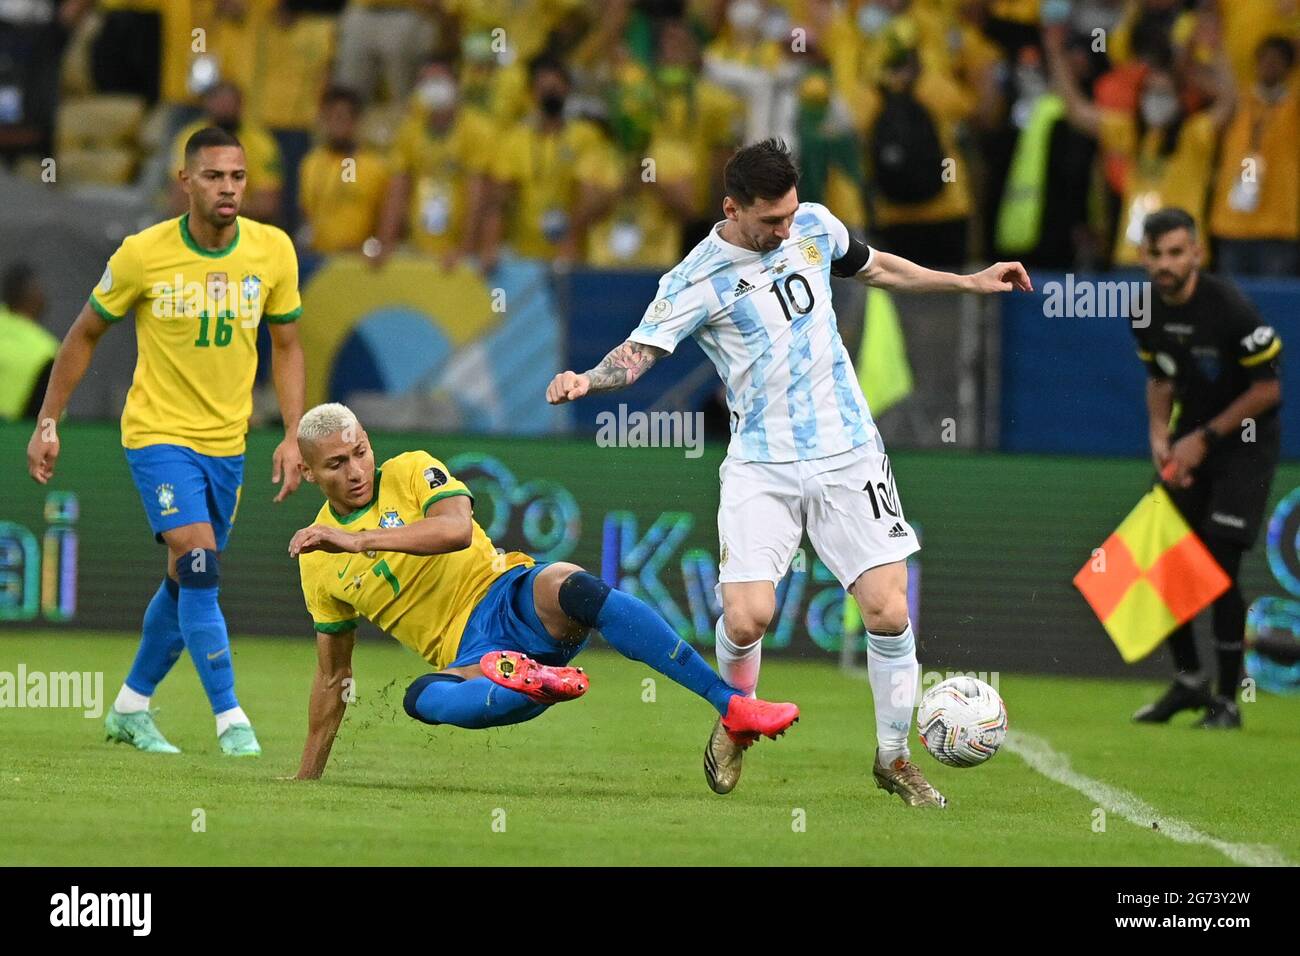 Rio De Janeiro, Brazil. 10th July, 2021. Football: Copa America, Final, Argentina - Brazil, Maracana Stadium. Richarlyson (m.) of Brazil tries to stop Lionel Messi (r) of Argentina as Renan Lodi looks on. Credit: Andre Borges/dpa/Alamy Live News Stock Photo